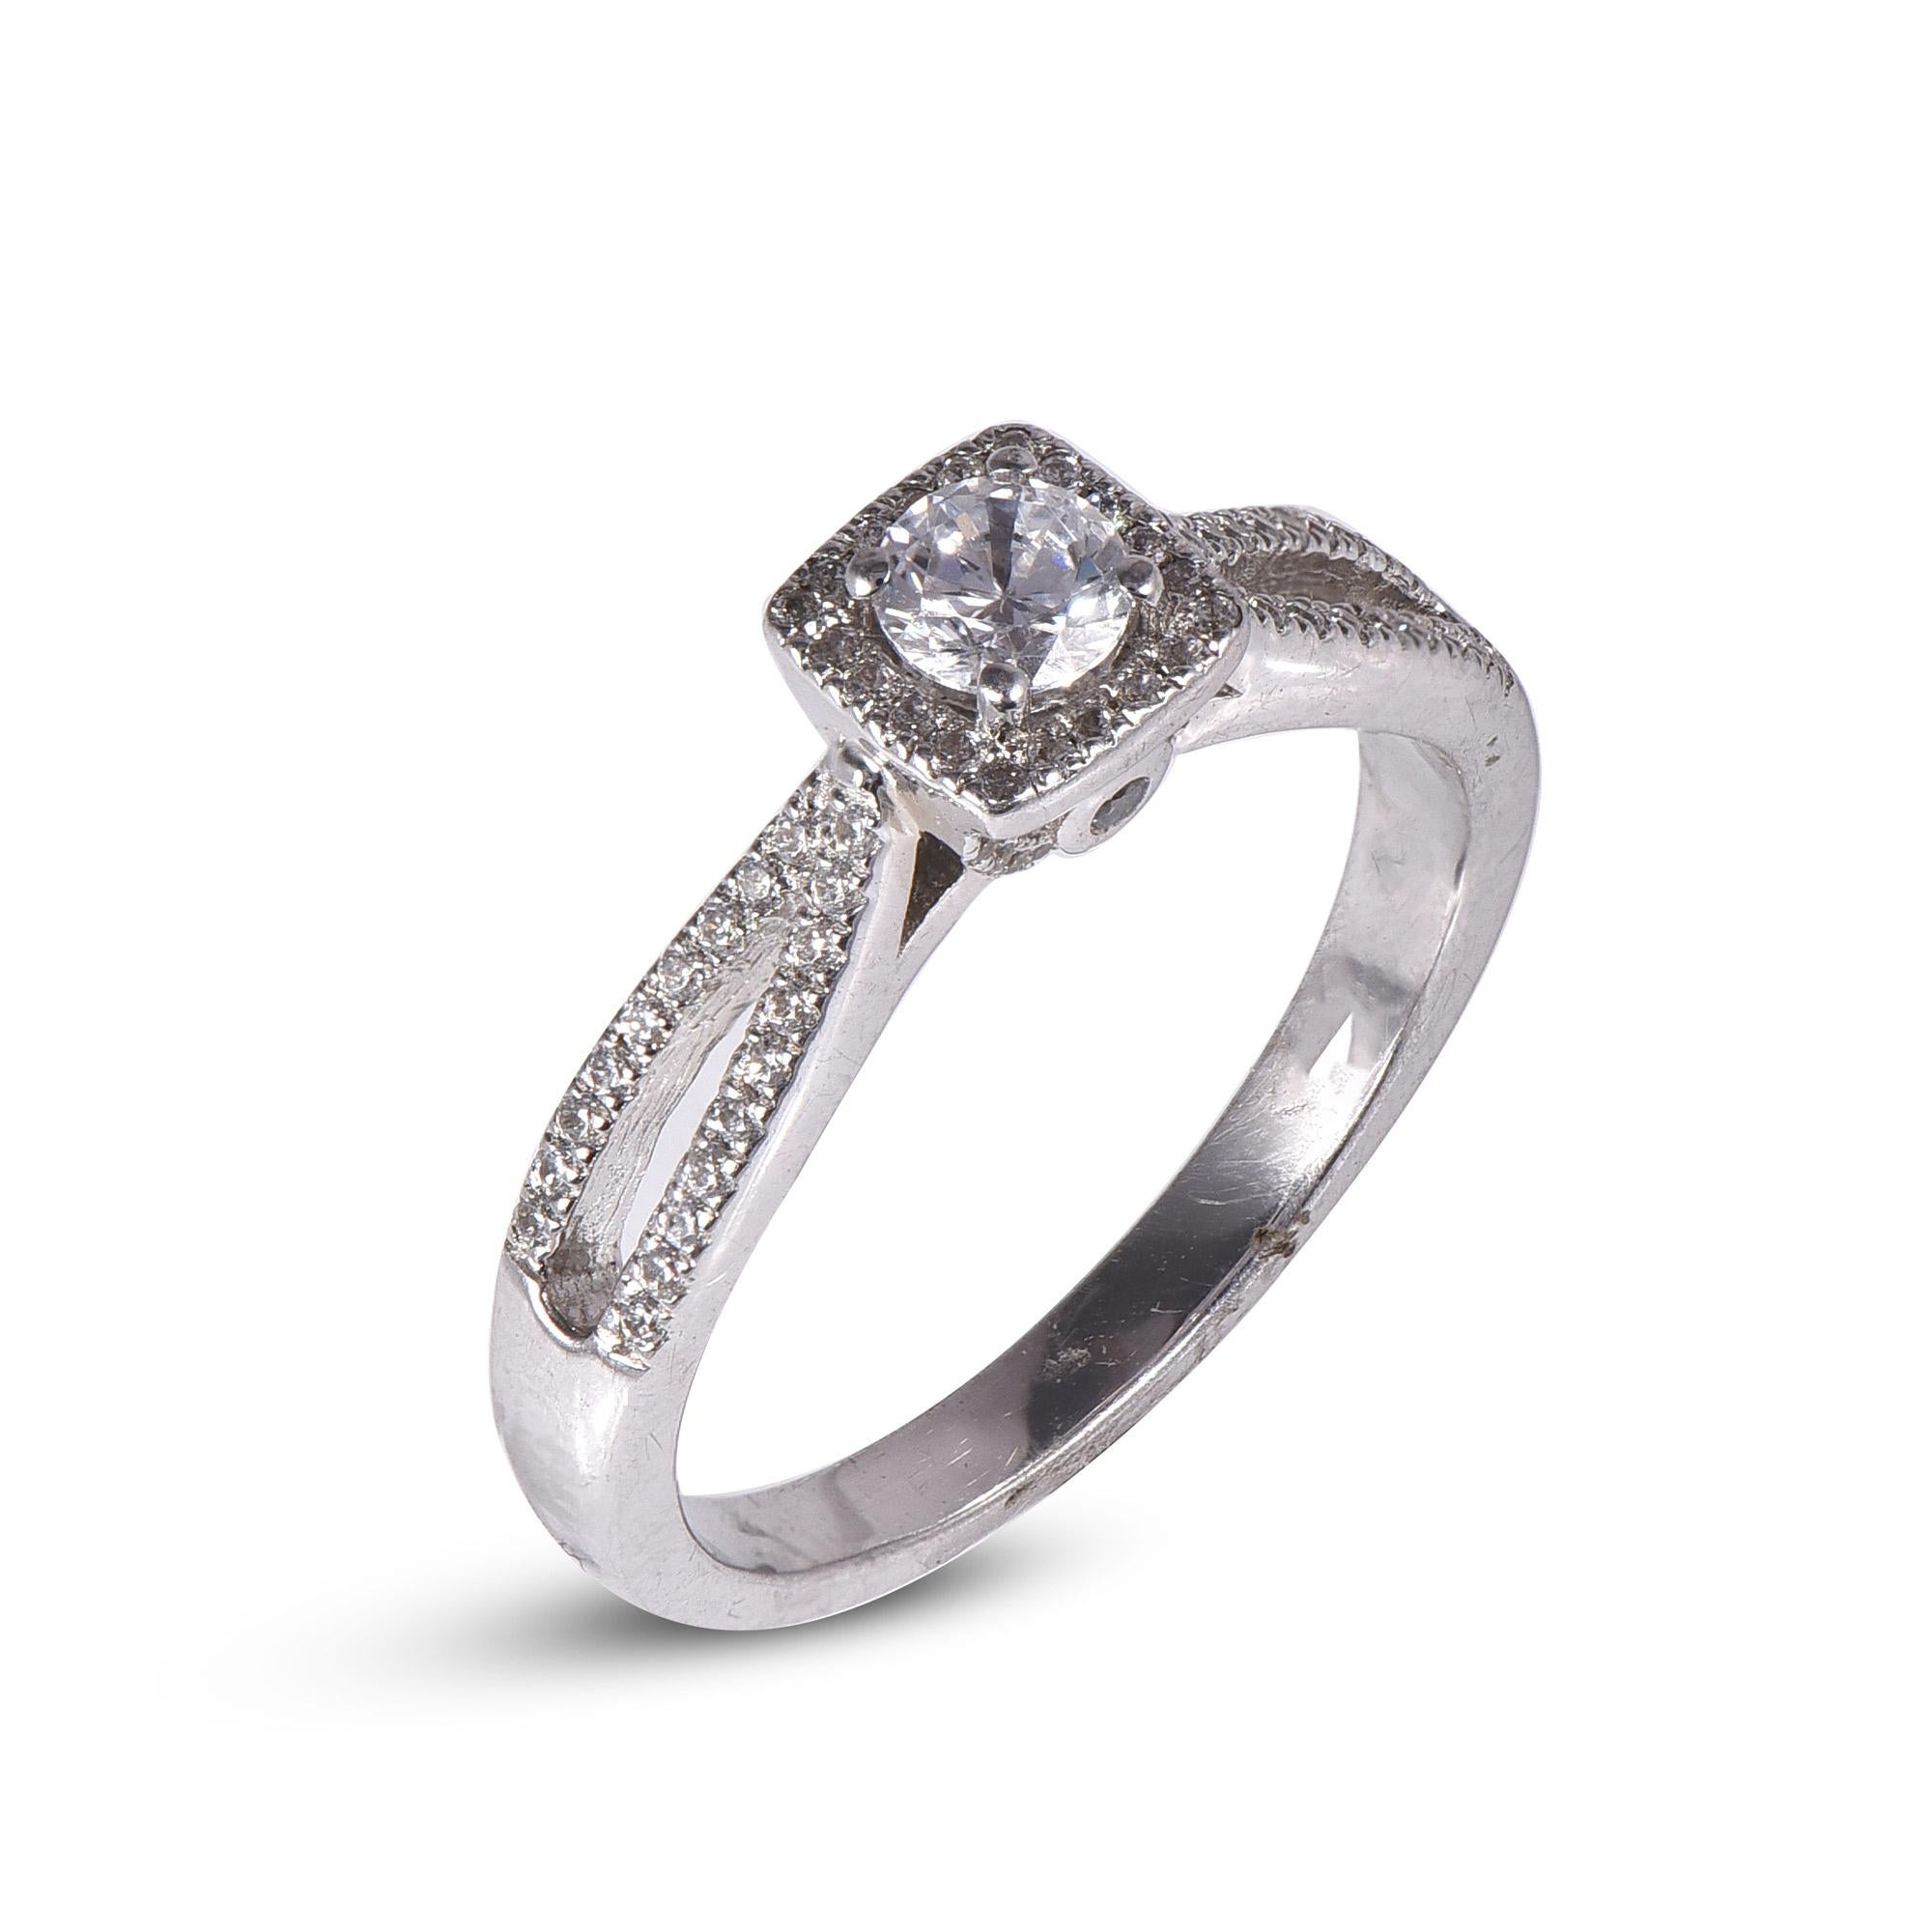 Simply stunning engagement ring features 0.25 ct centre stone and 0.25 ct diamond frame and split shank lined diamonds. This ring is handcrafted in 18 kt white gold and embellished with 79 brilliant round diamond set in prong and micro-pave setting.